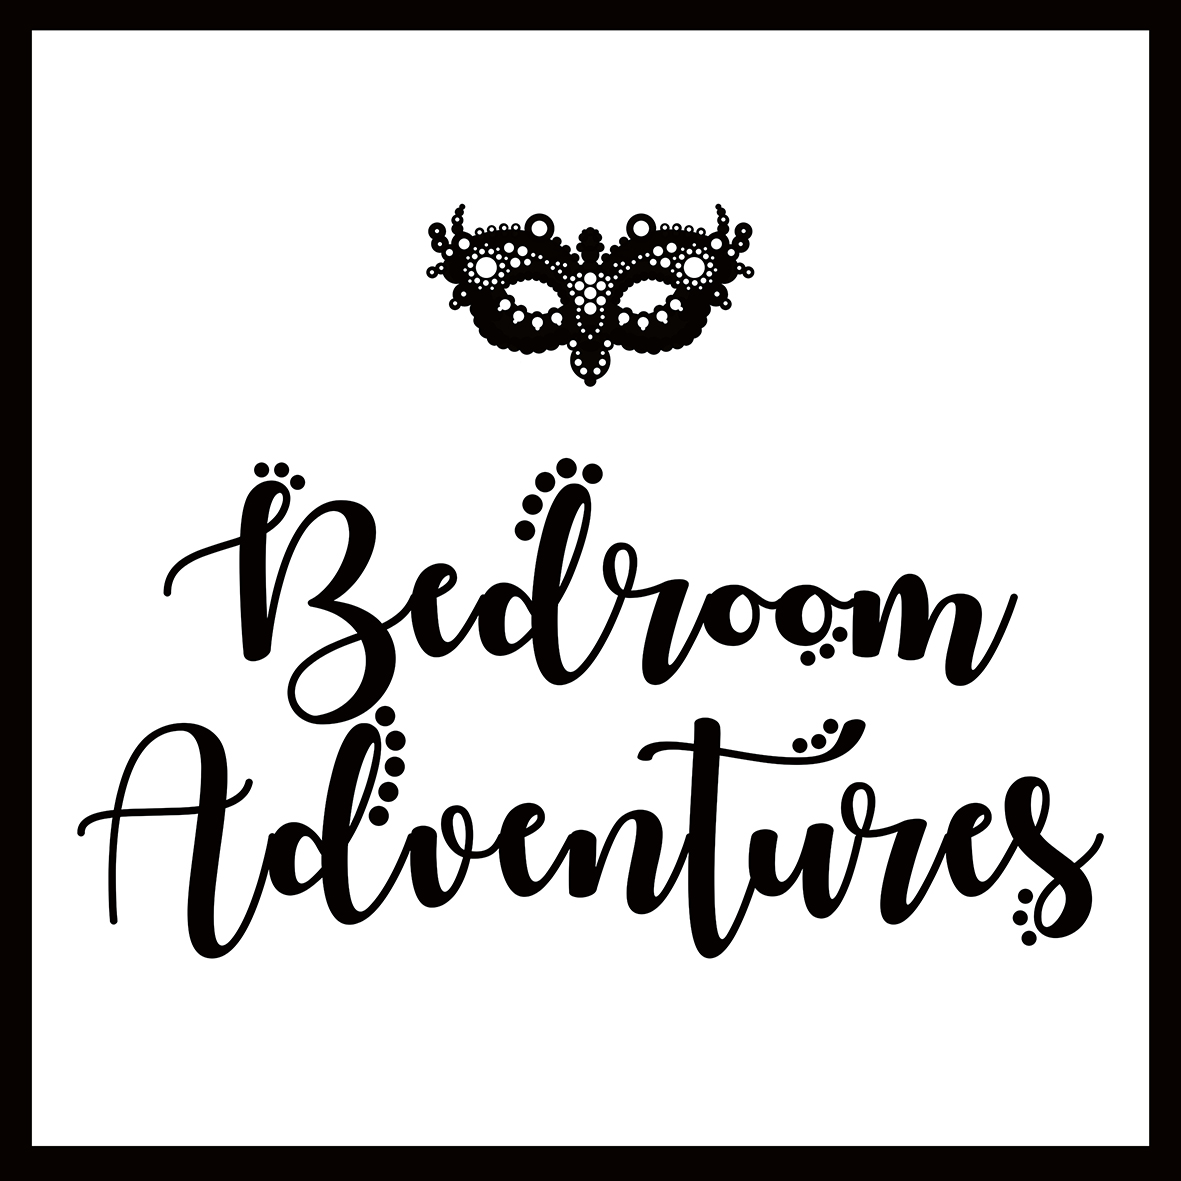 Bedroom Adventures Logo is a black lacy eye mask with the brand name in curvy black writing below